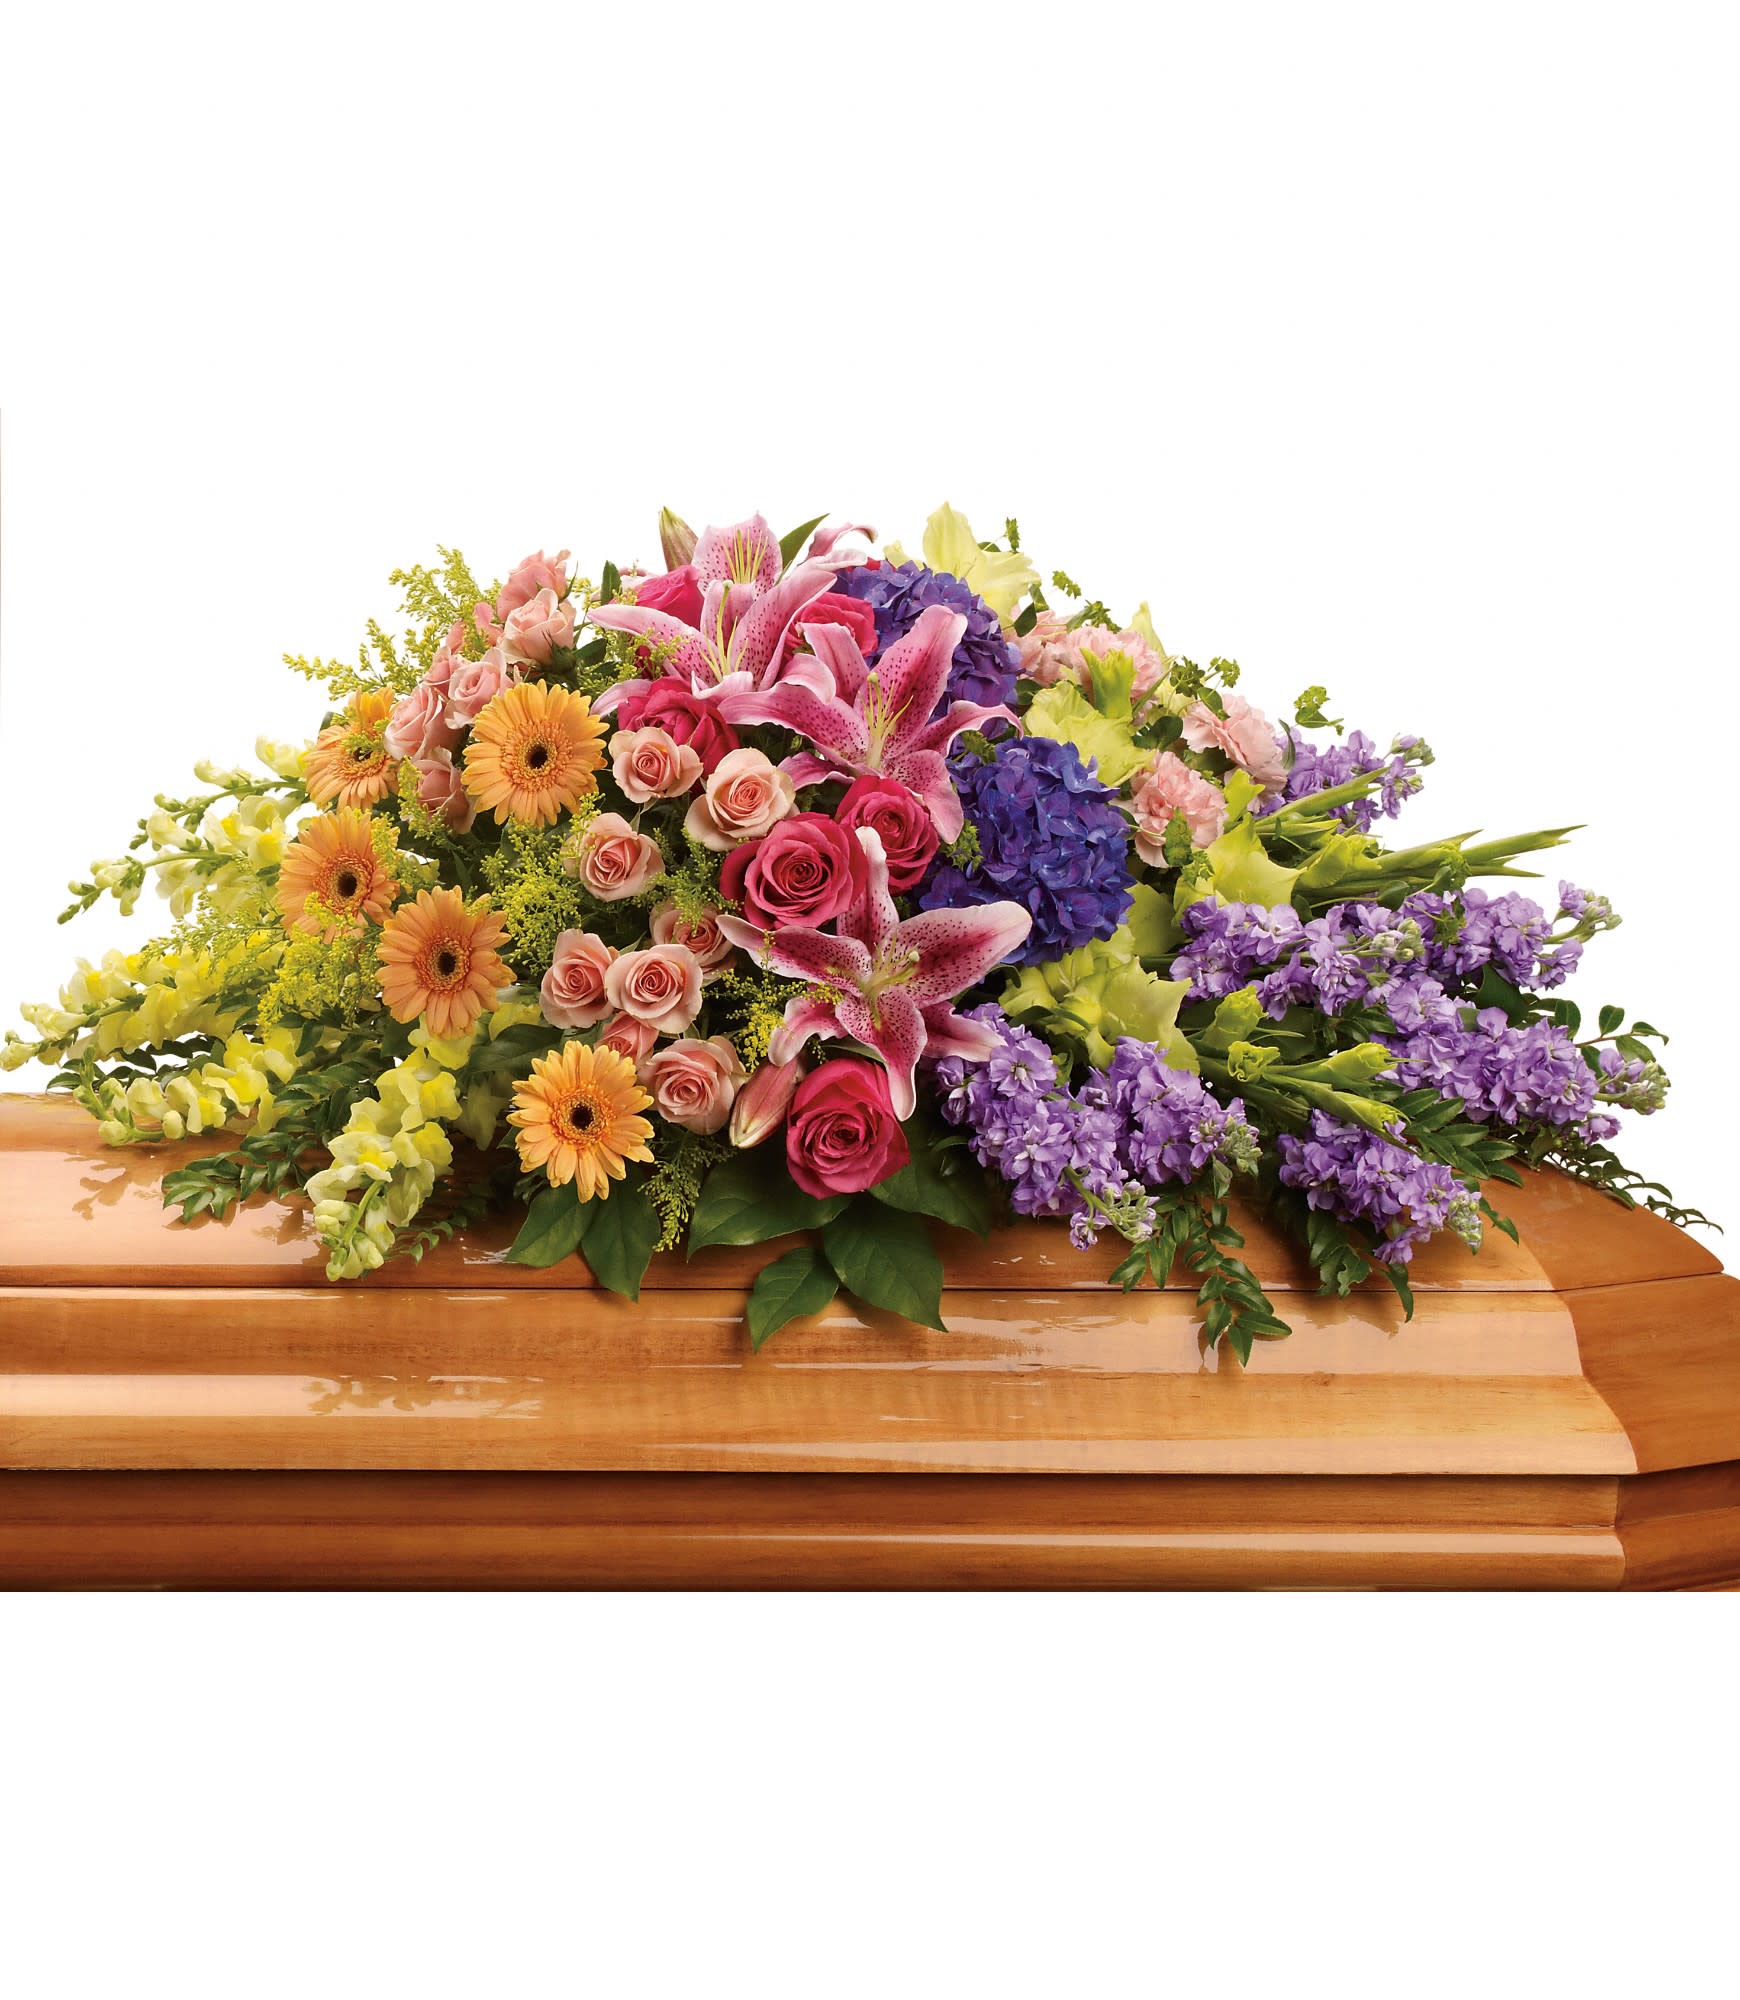 Garden of Sweet Memories Casket Spray - Bring a gentle radiance to the memorial service with this lovely multicolored casket spray of roses, lilies and other favorites. A beautiful way to honor the departed. 